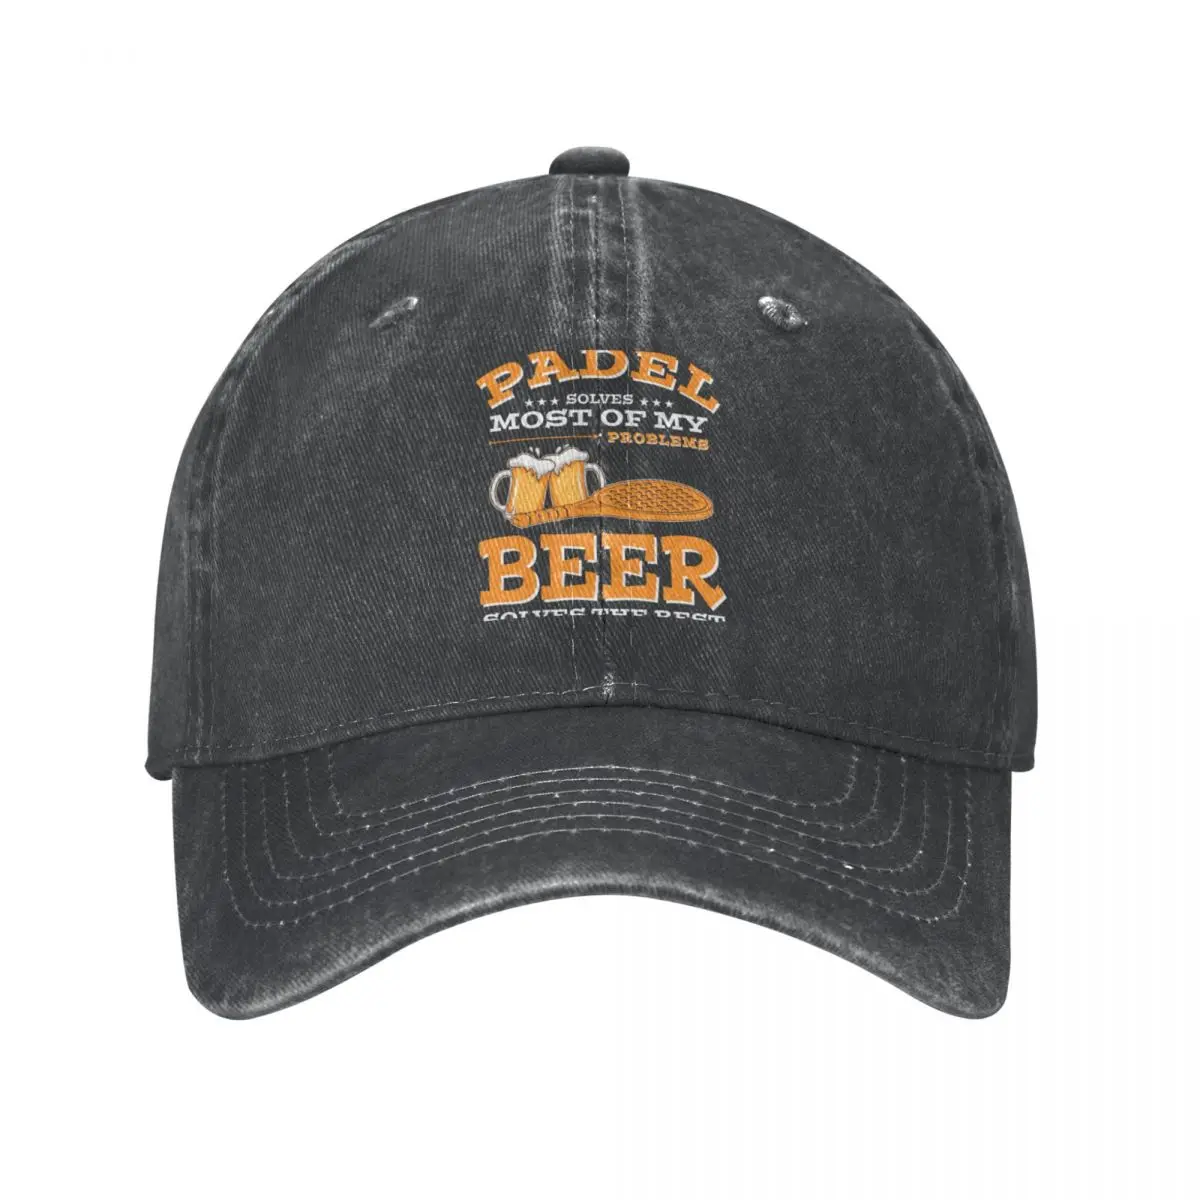 

Padel solves most of my Problems Beer Solves the rest Padel player Gift Cap Cowboy Hat hat winter boy child hat Women's